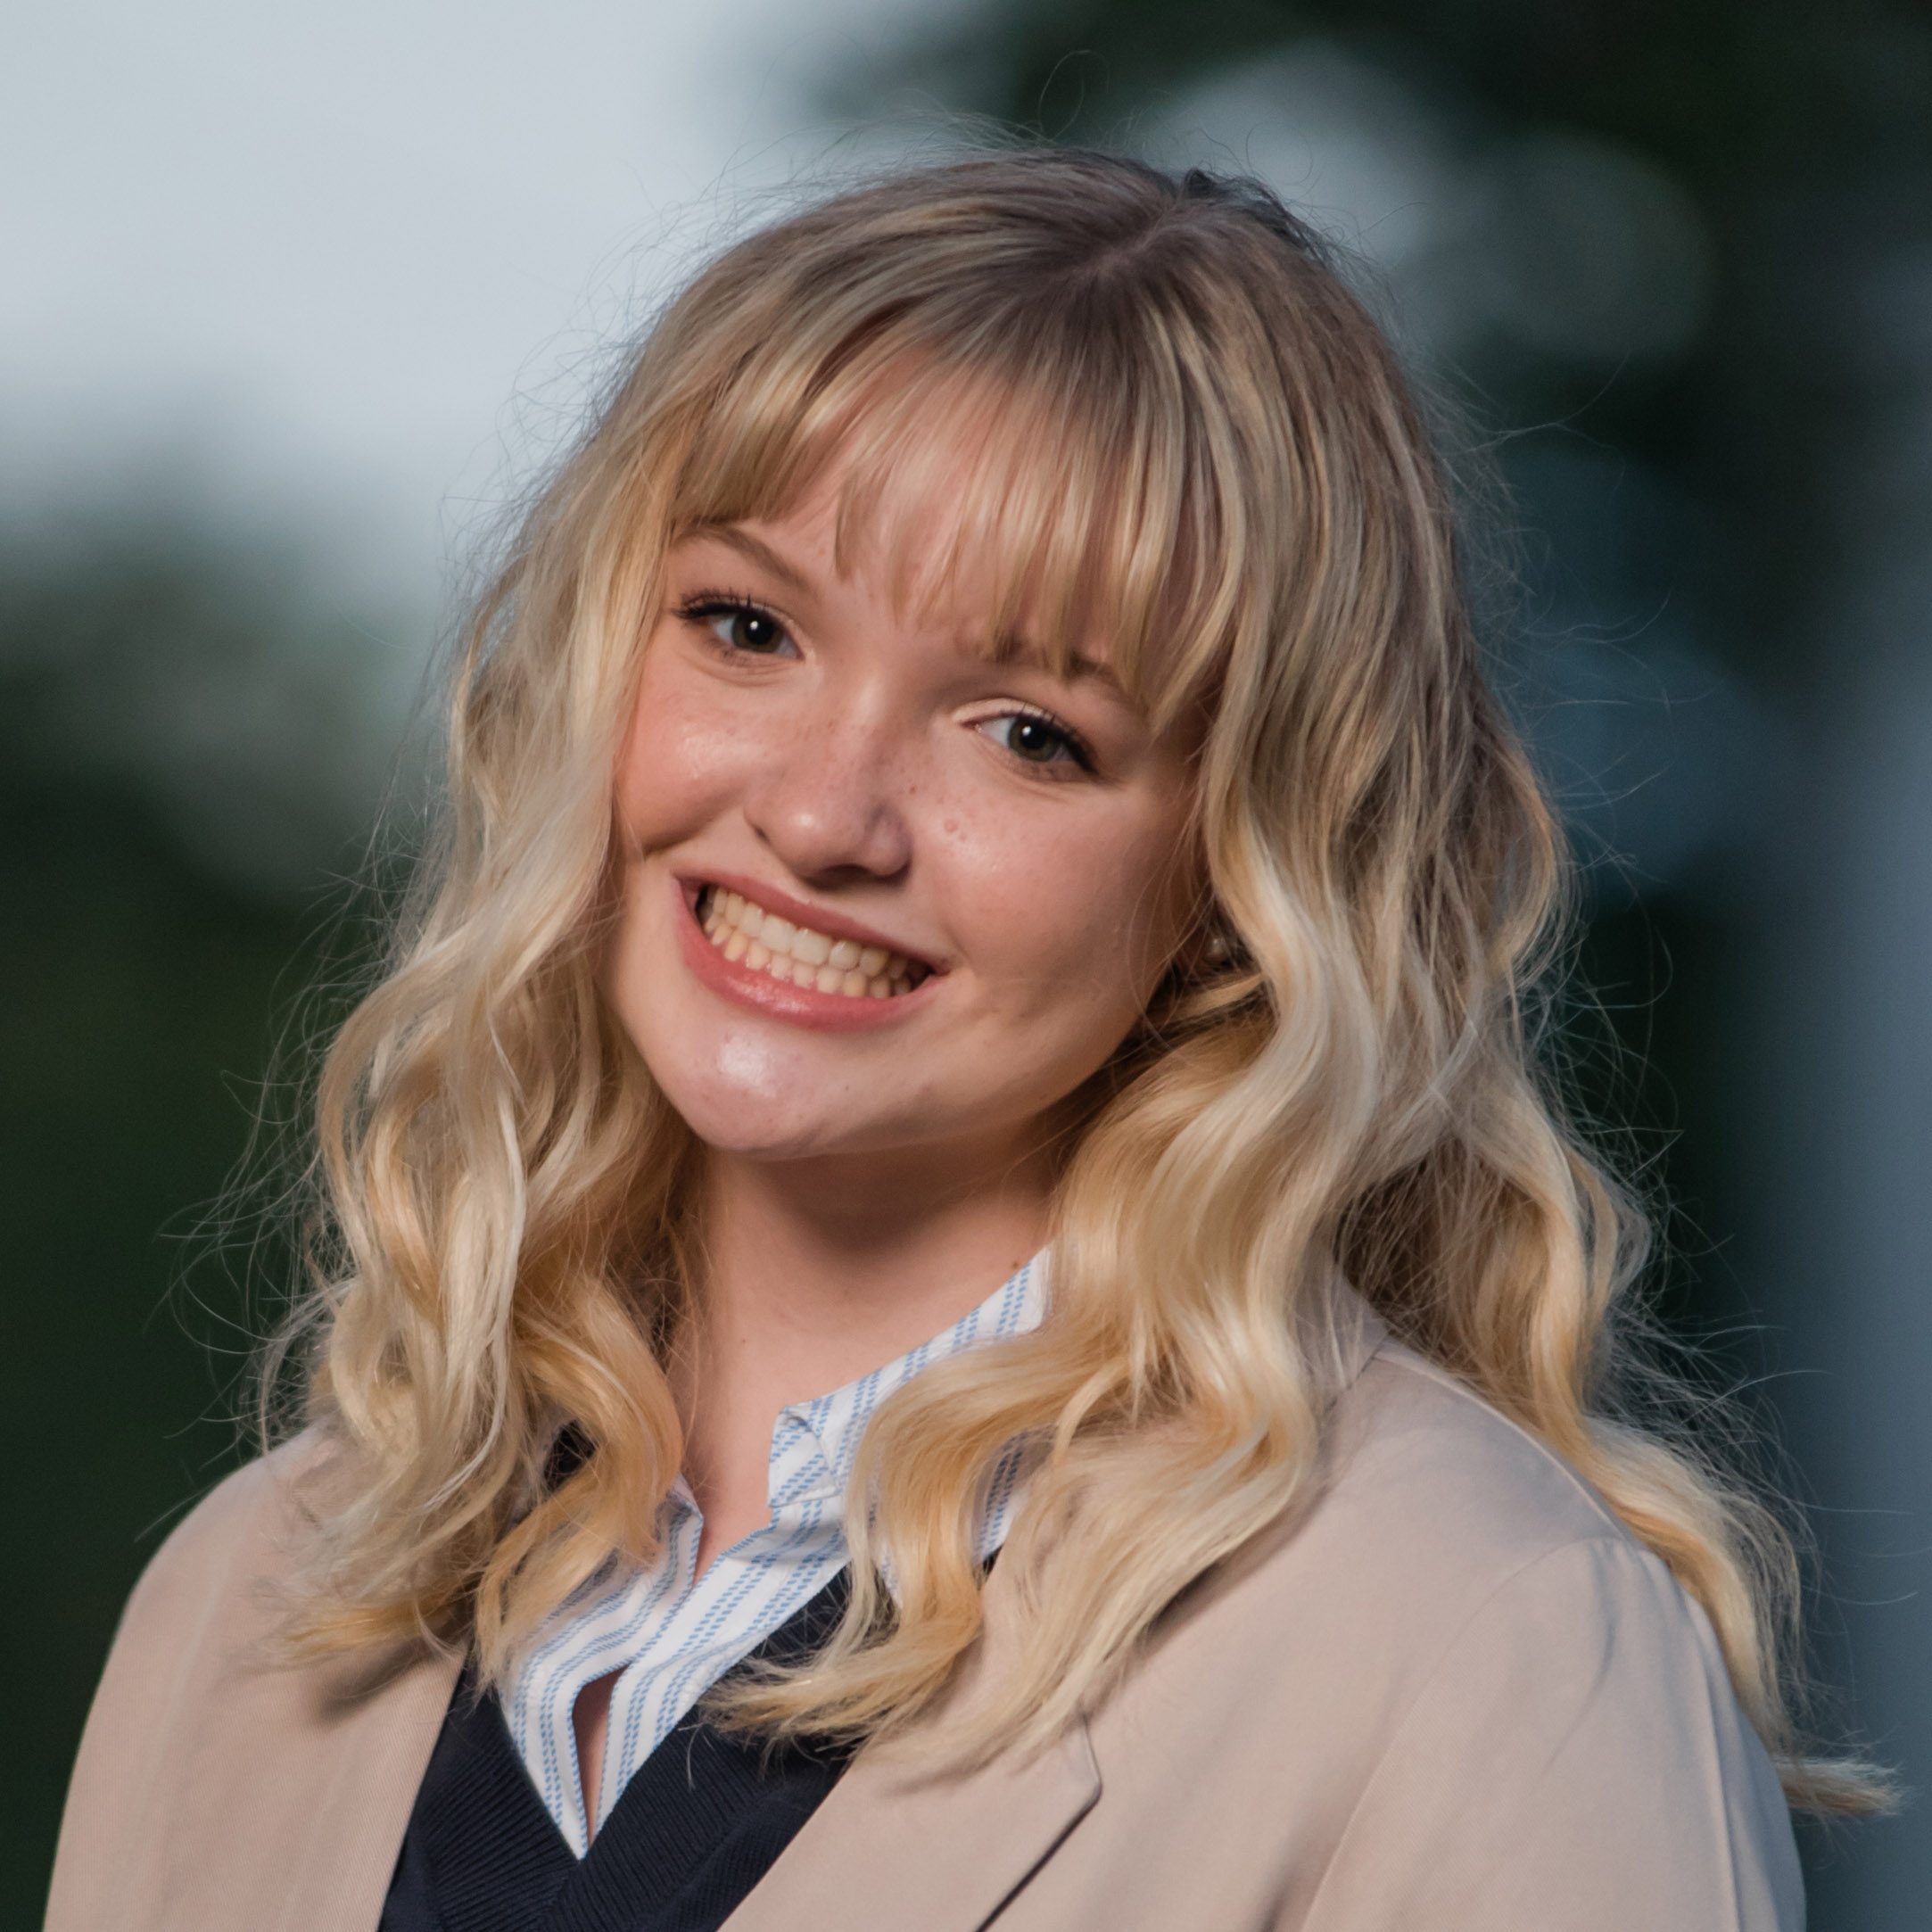 Head shot of first place winner Meredith Perkins. We see Meredith in the foreground smiling with long light blond hair and wearing a tan trench coat over a black sweater vest and a white and light blue pins-stripped shirt